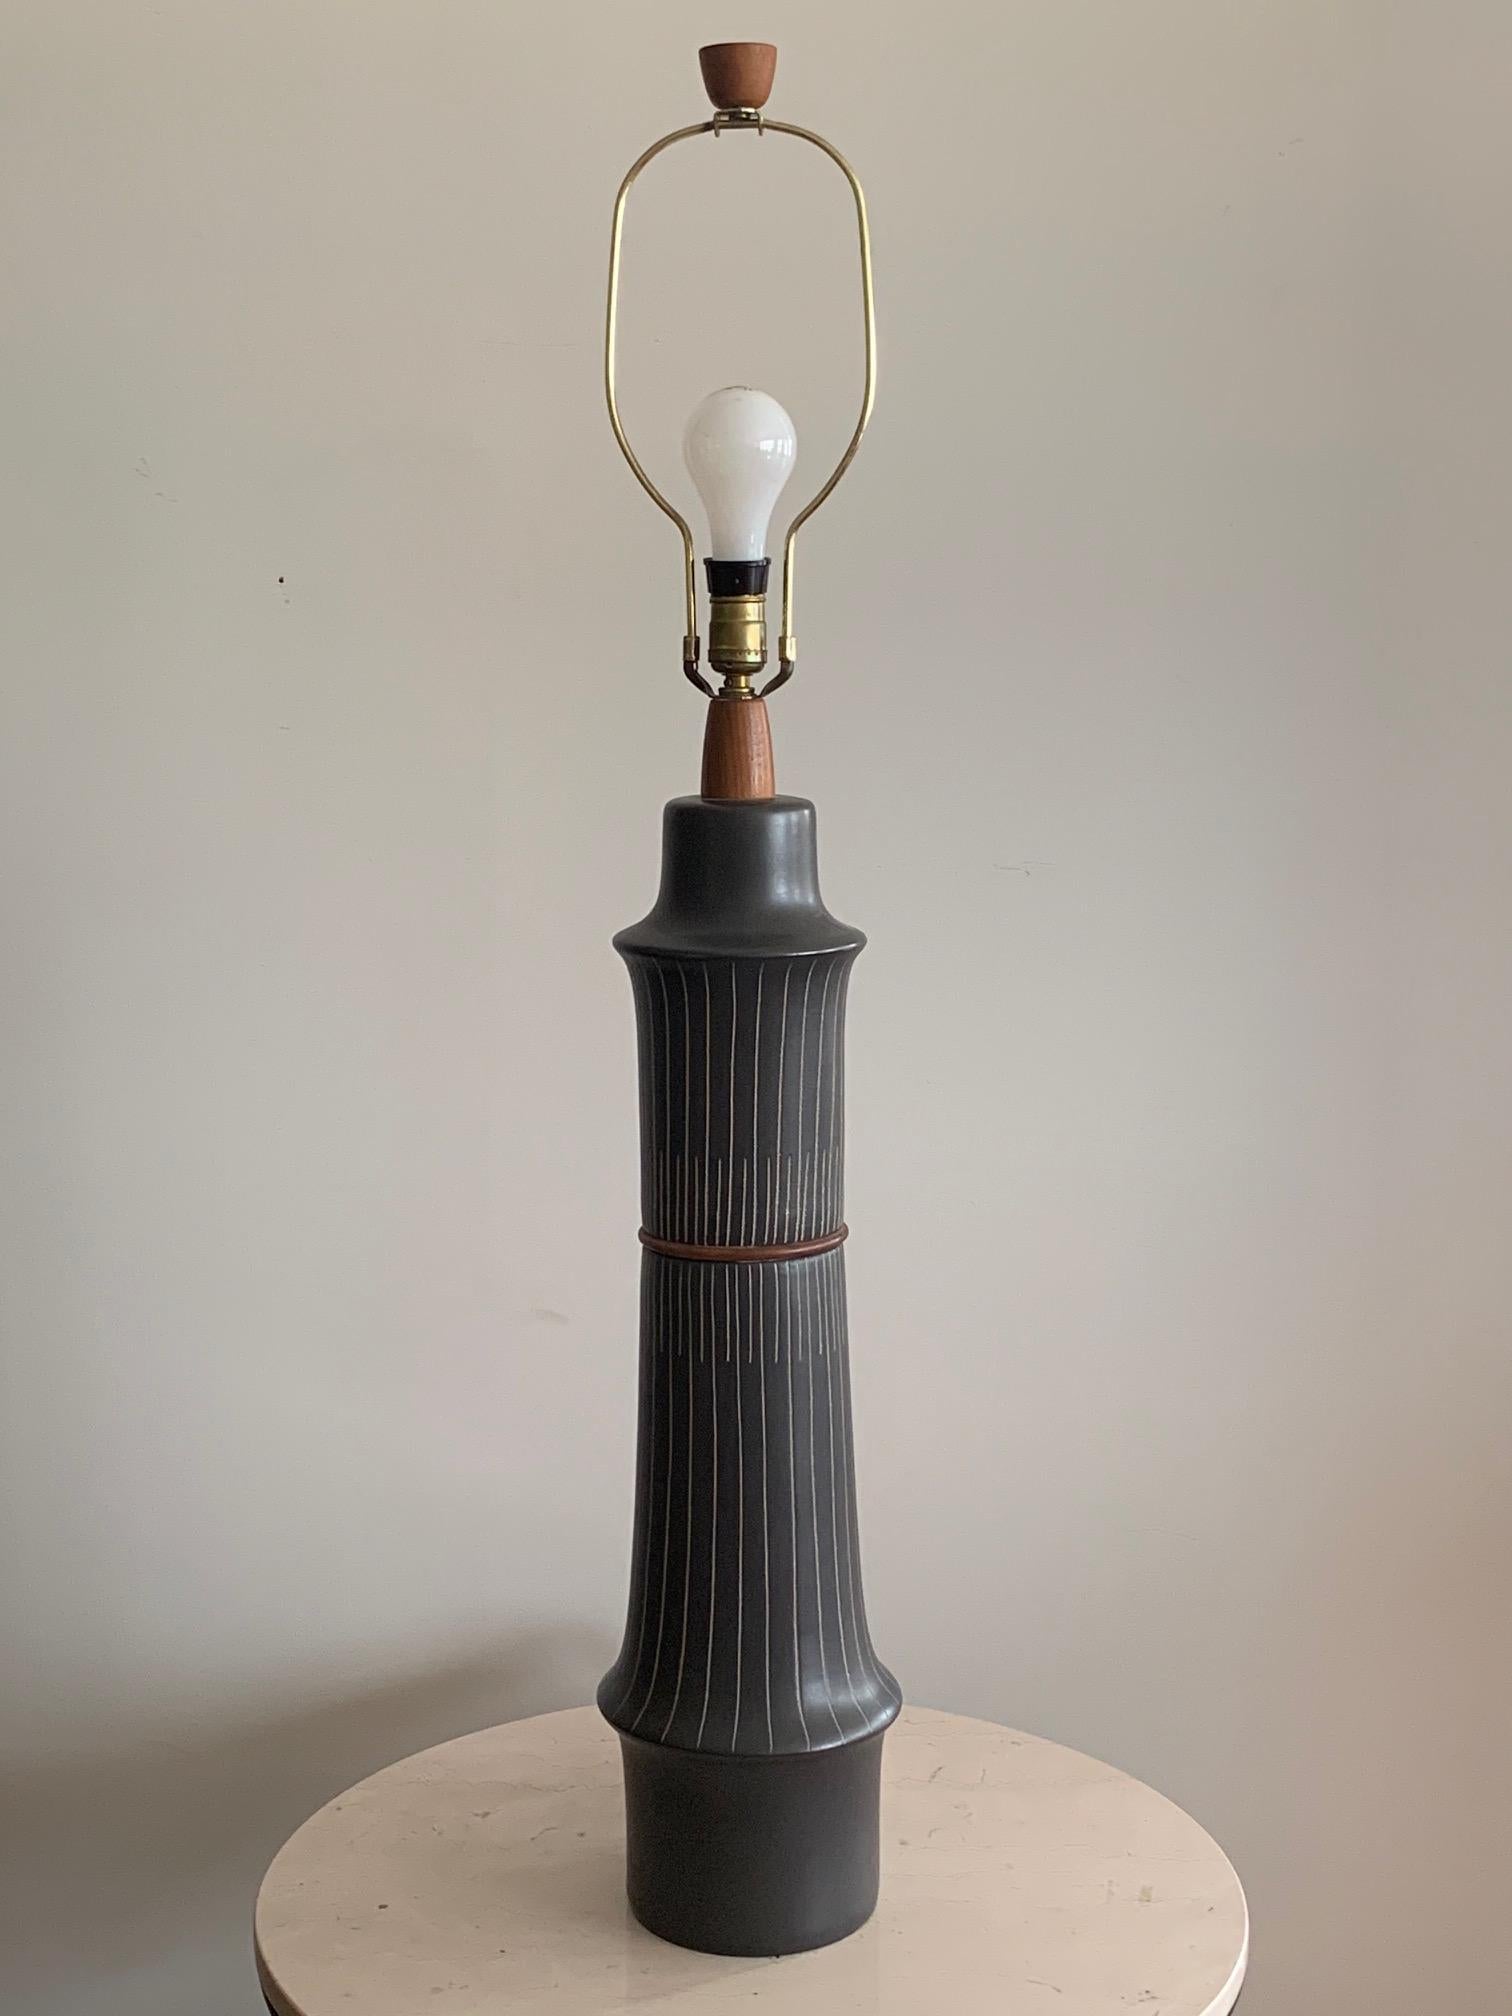 A stunning Martz lamp made of two sections with elegant sgraffito decoration. Measures: Ceramic base is 26.75